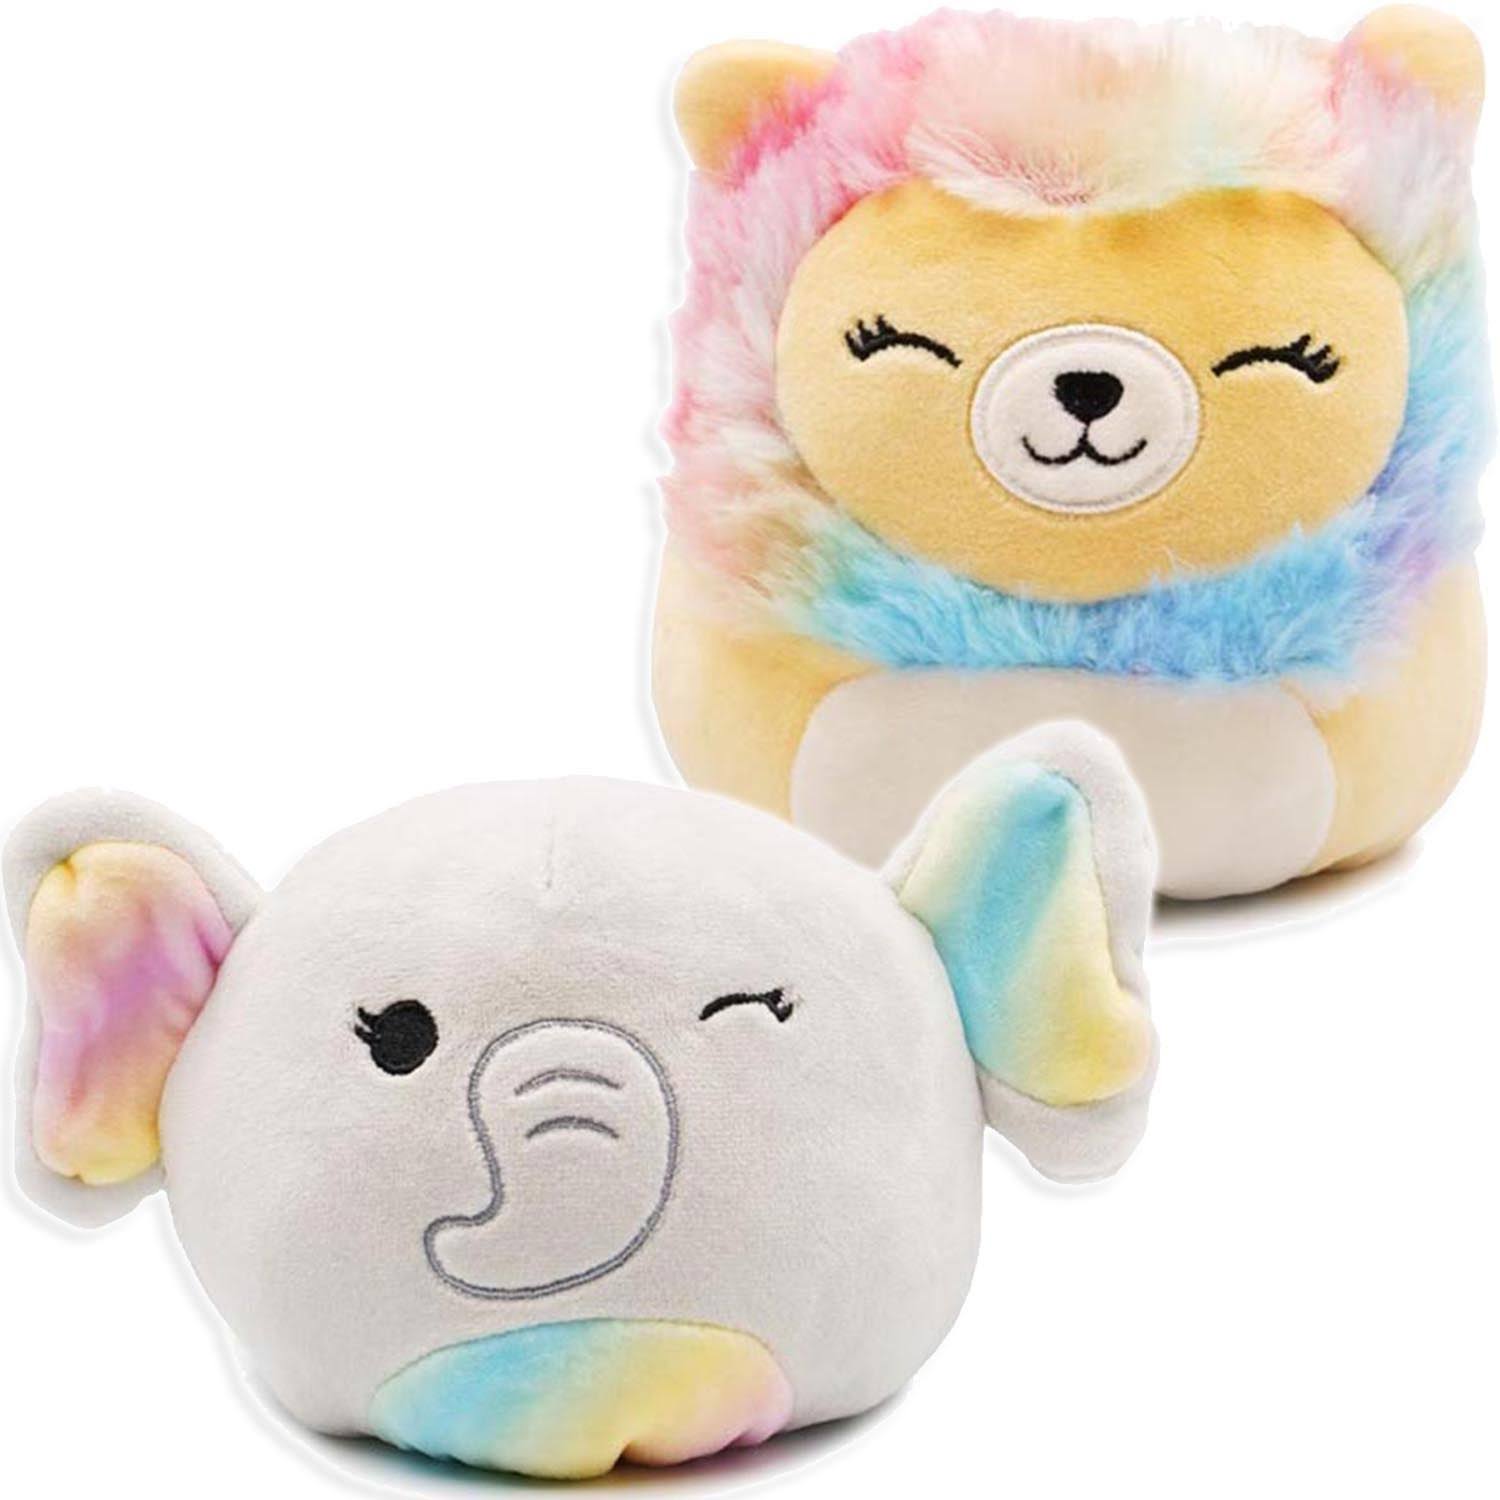 Squishmallows Flip-A-Mallows 12-Inch Mint Ice Cream and Toasted Cinnamon  Roll Plush - Add Maya and Chanel to Your Squad, Ultrasoft Stuffed Animal